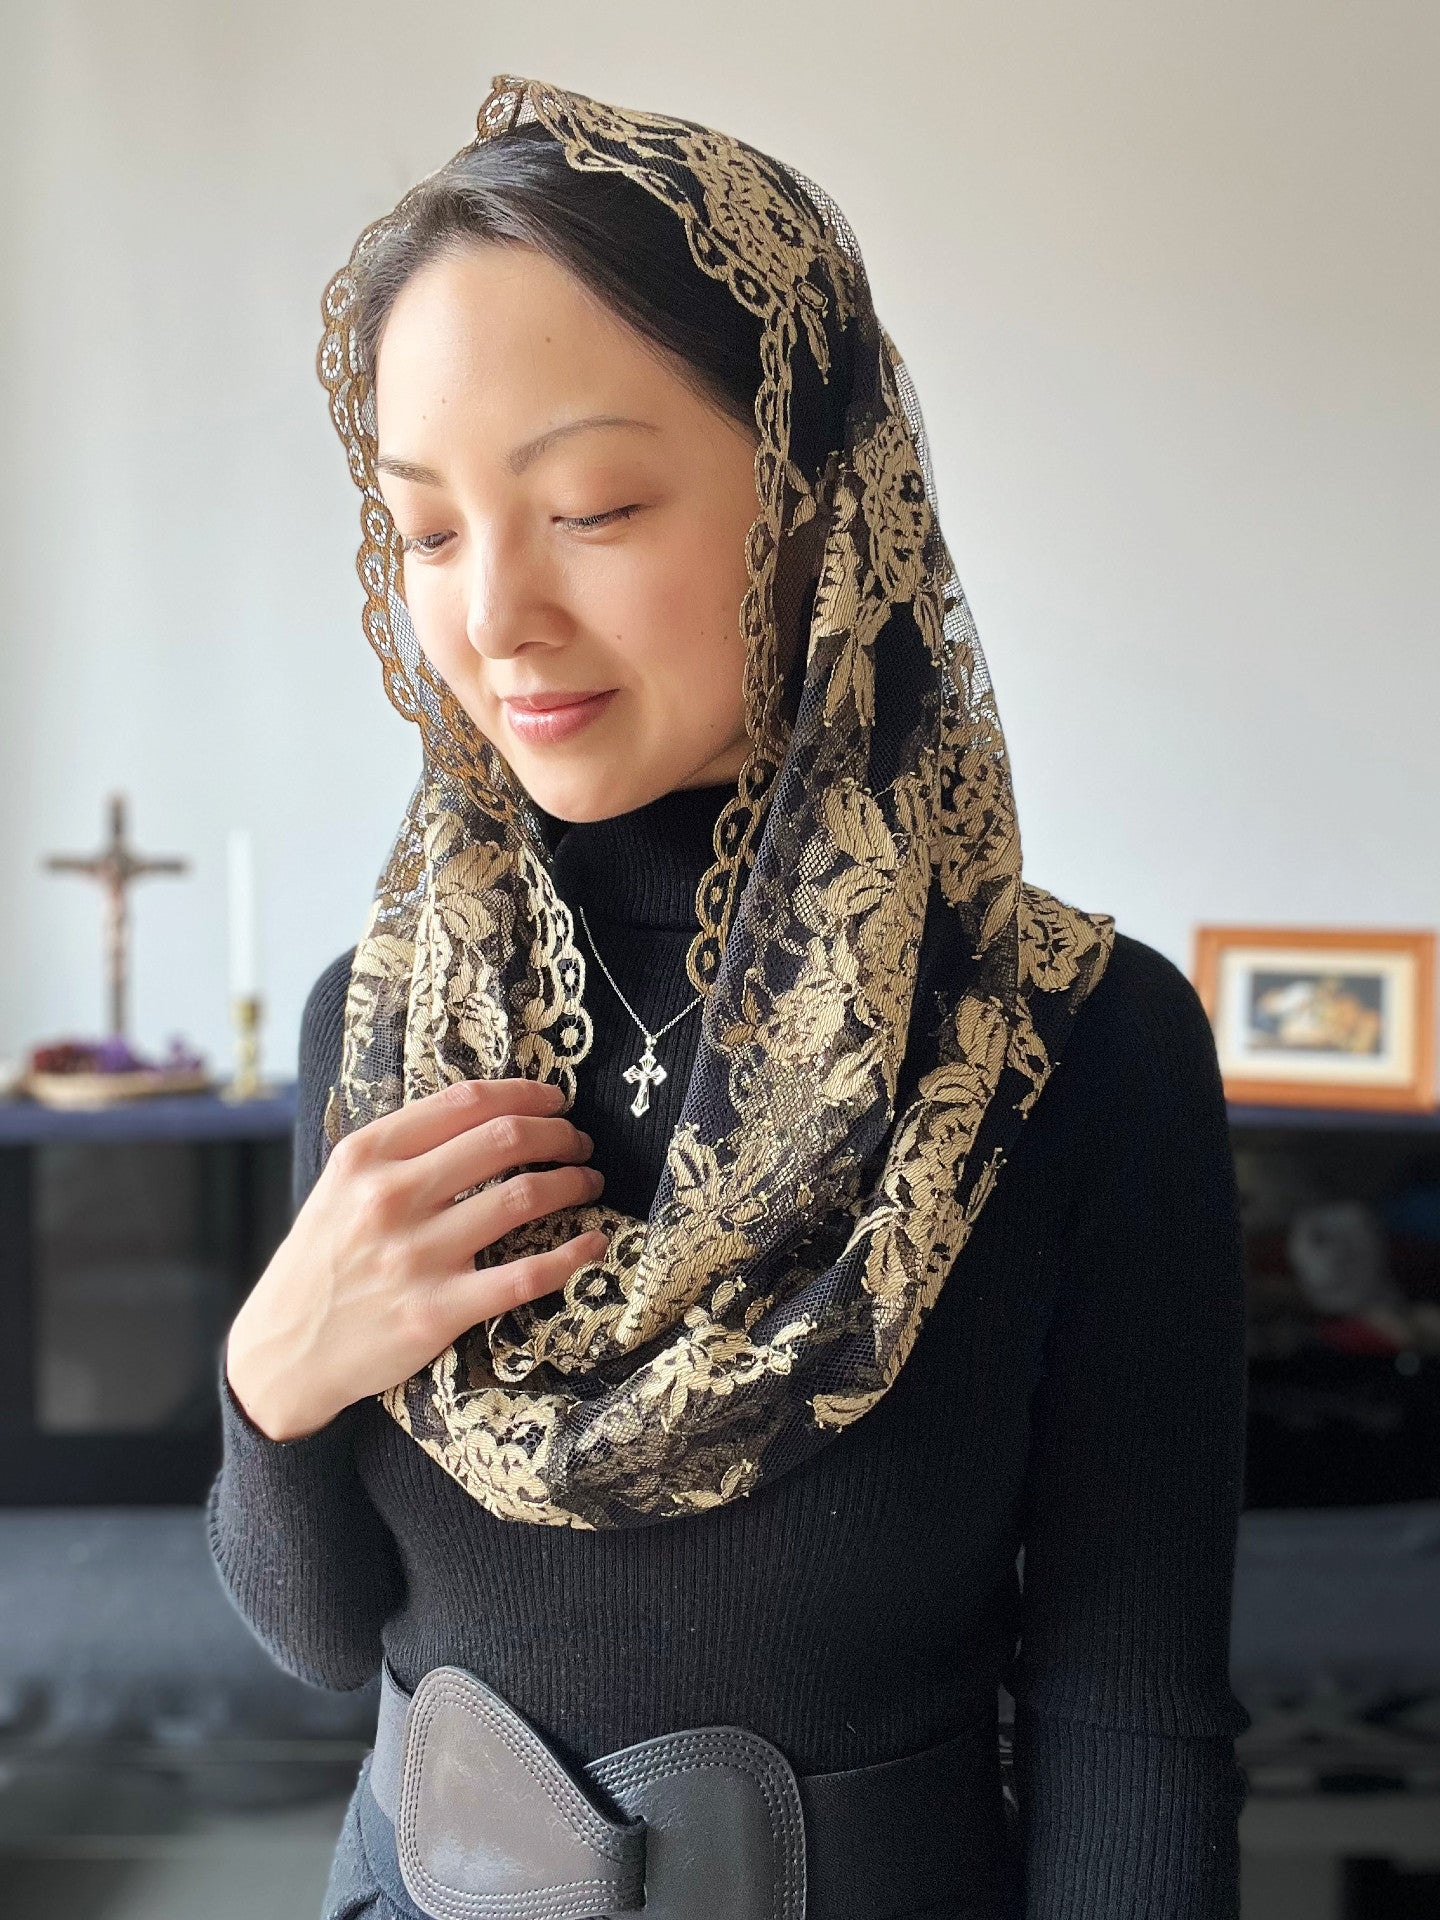 "Mother of Confessors" Chantilly Lace Infinity Veil (Black & Gold)